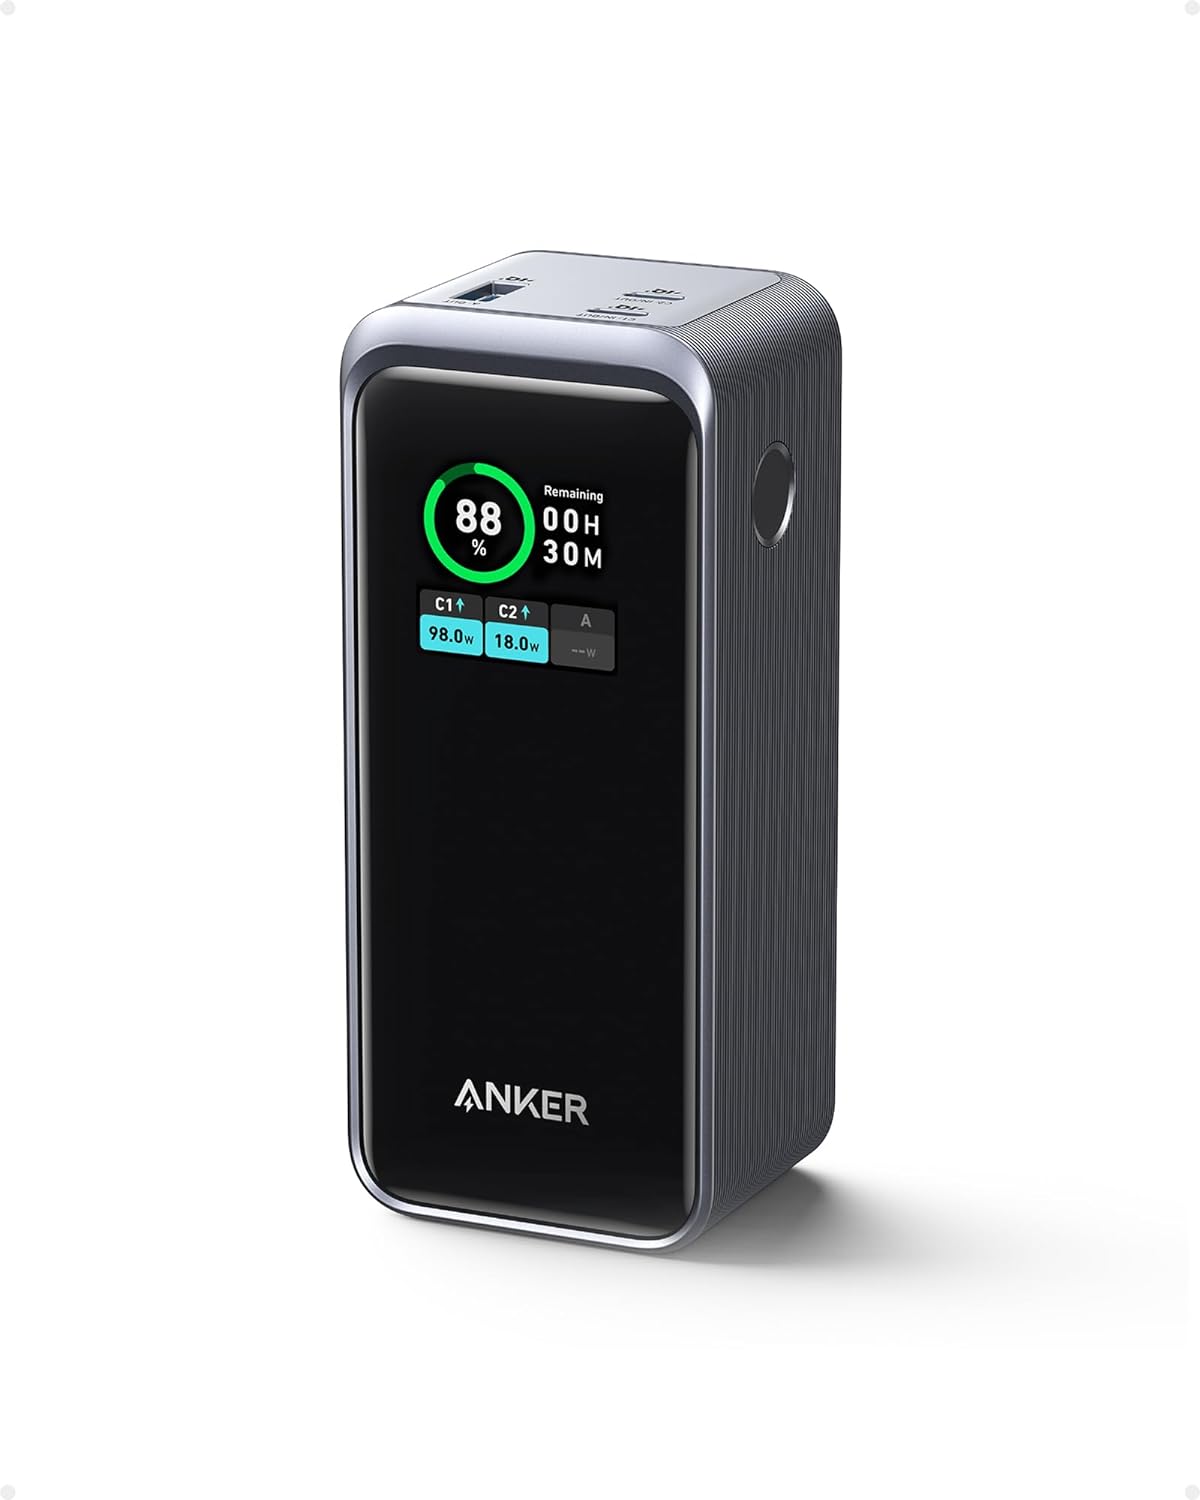 Anker Prime Power Bank, 20,000mAh Portable Charger wit 200W Output, Smart Digital Display, 2 USB-C and 1 USB-A Port $102.99 @AnkerDirect via Amazon